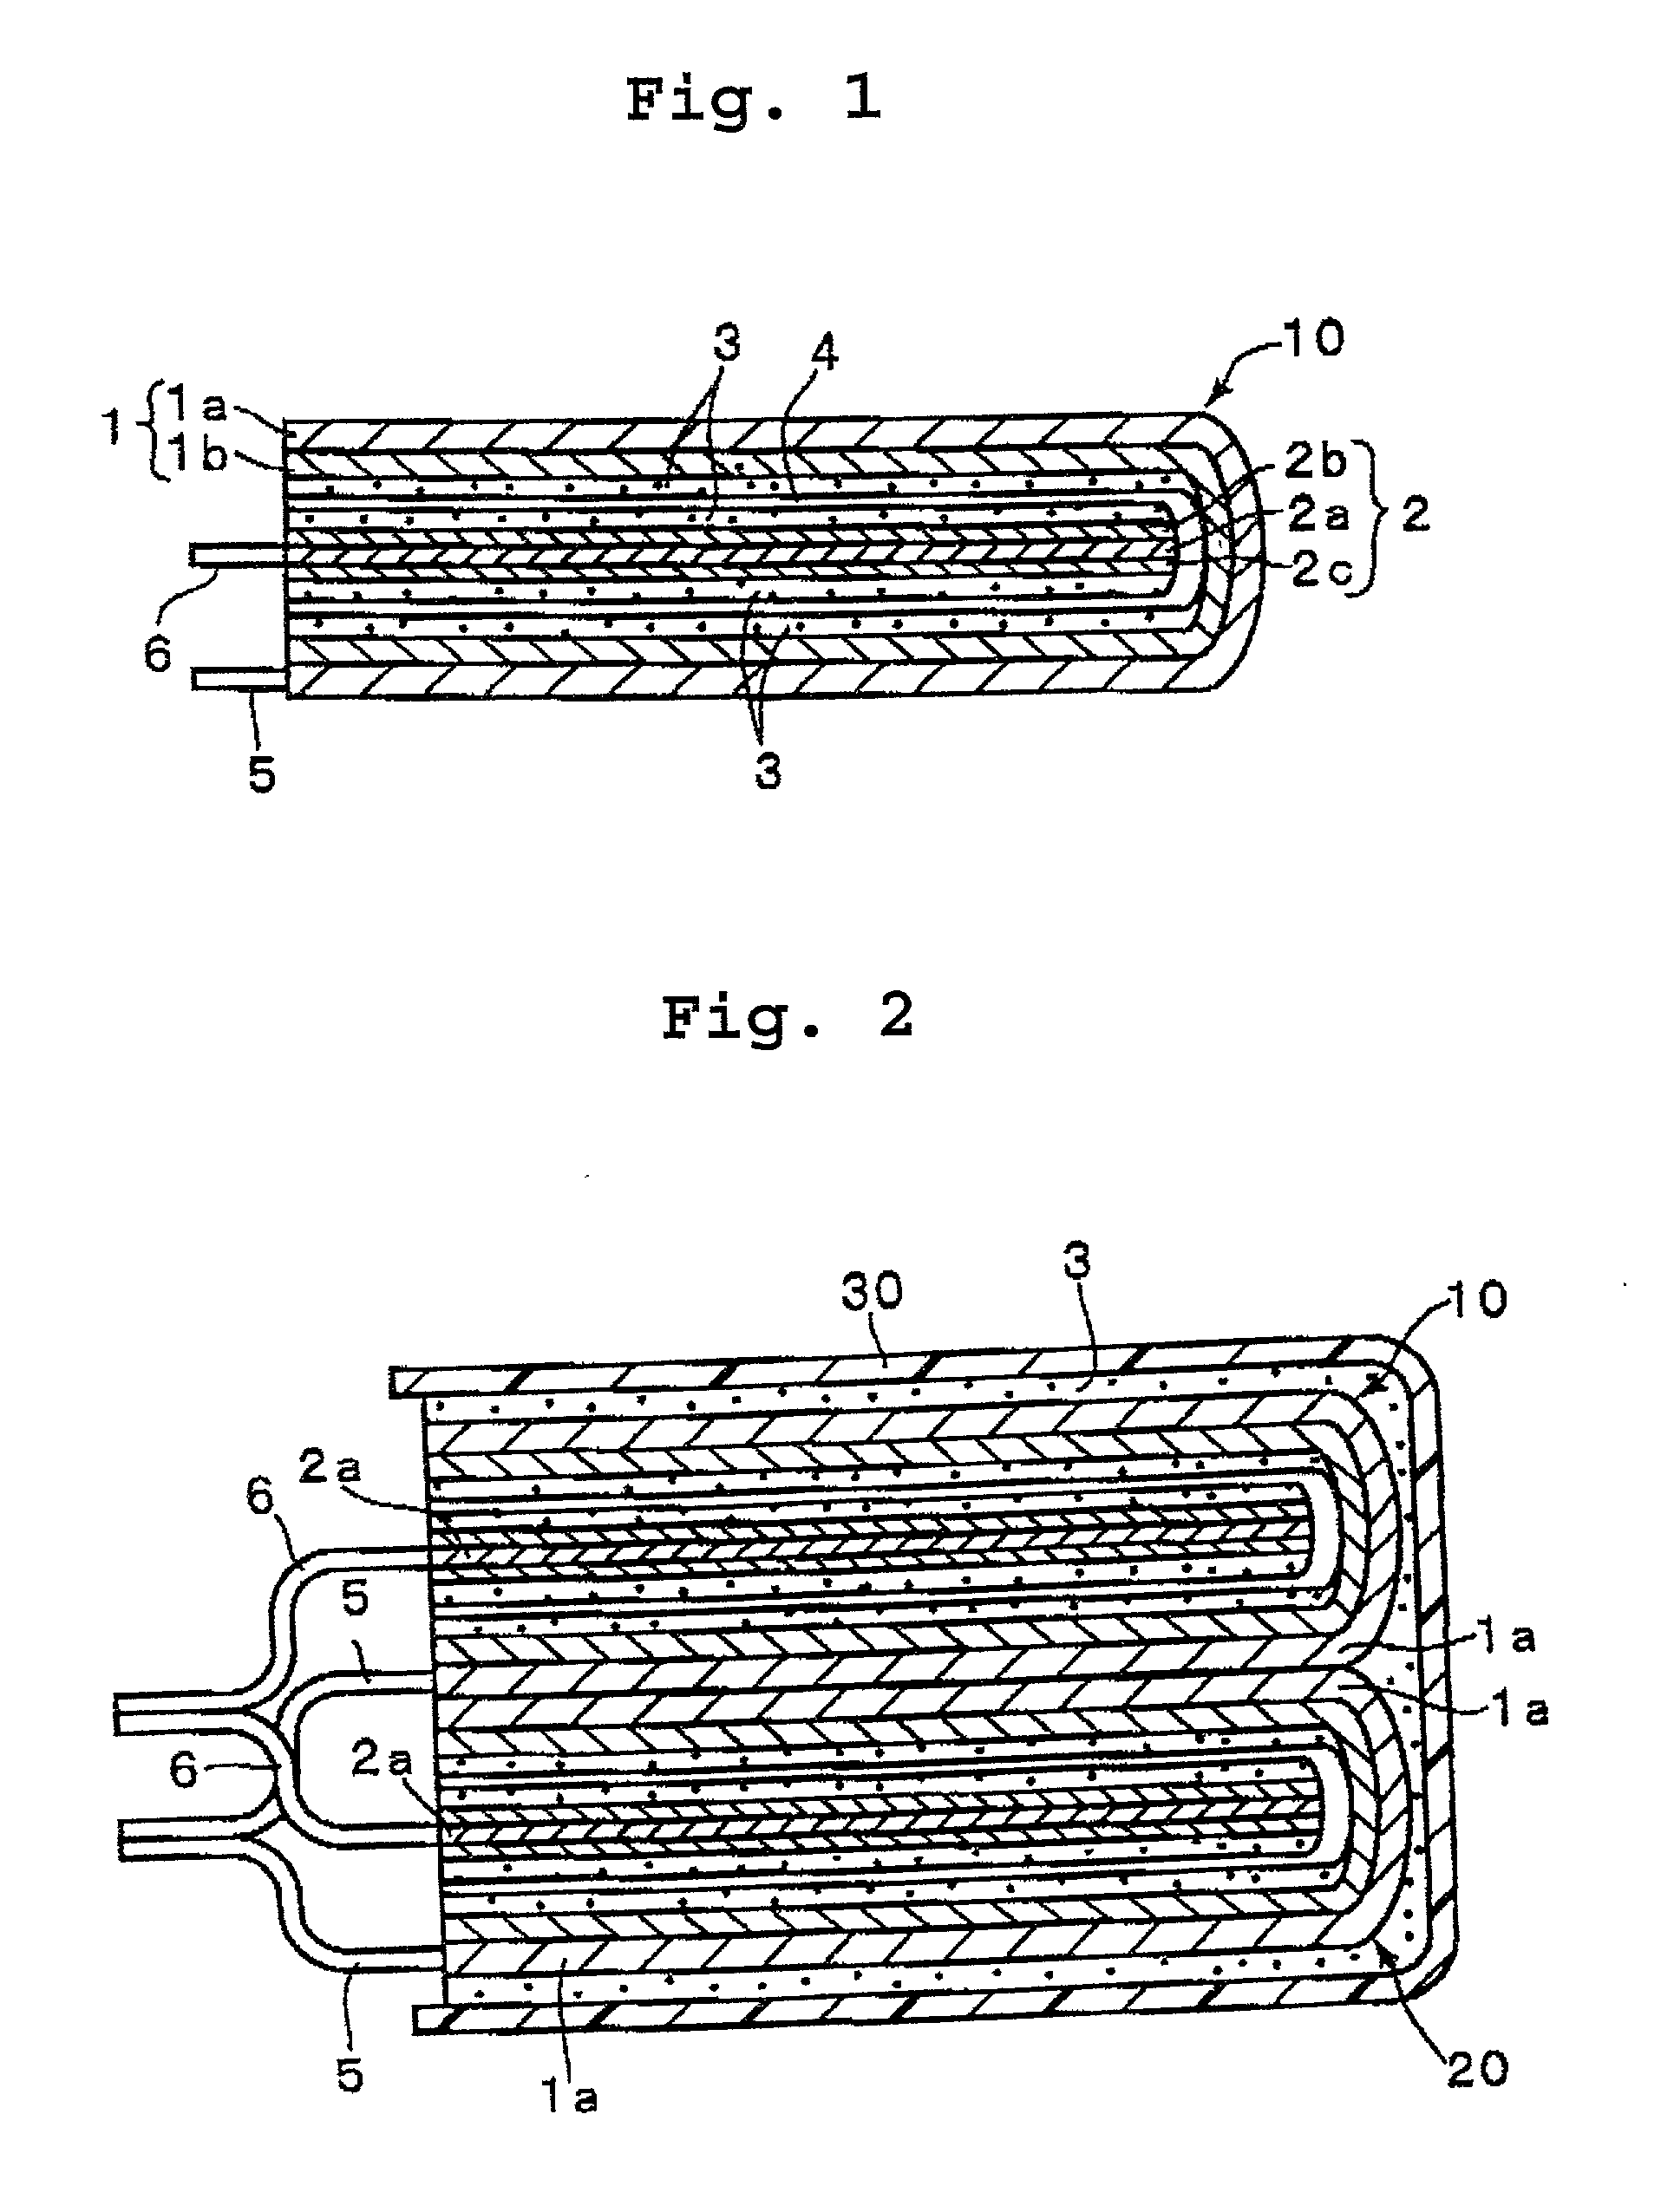 Polymer-electrolyte lithium secondary battery